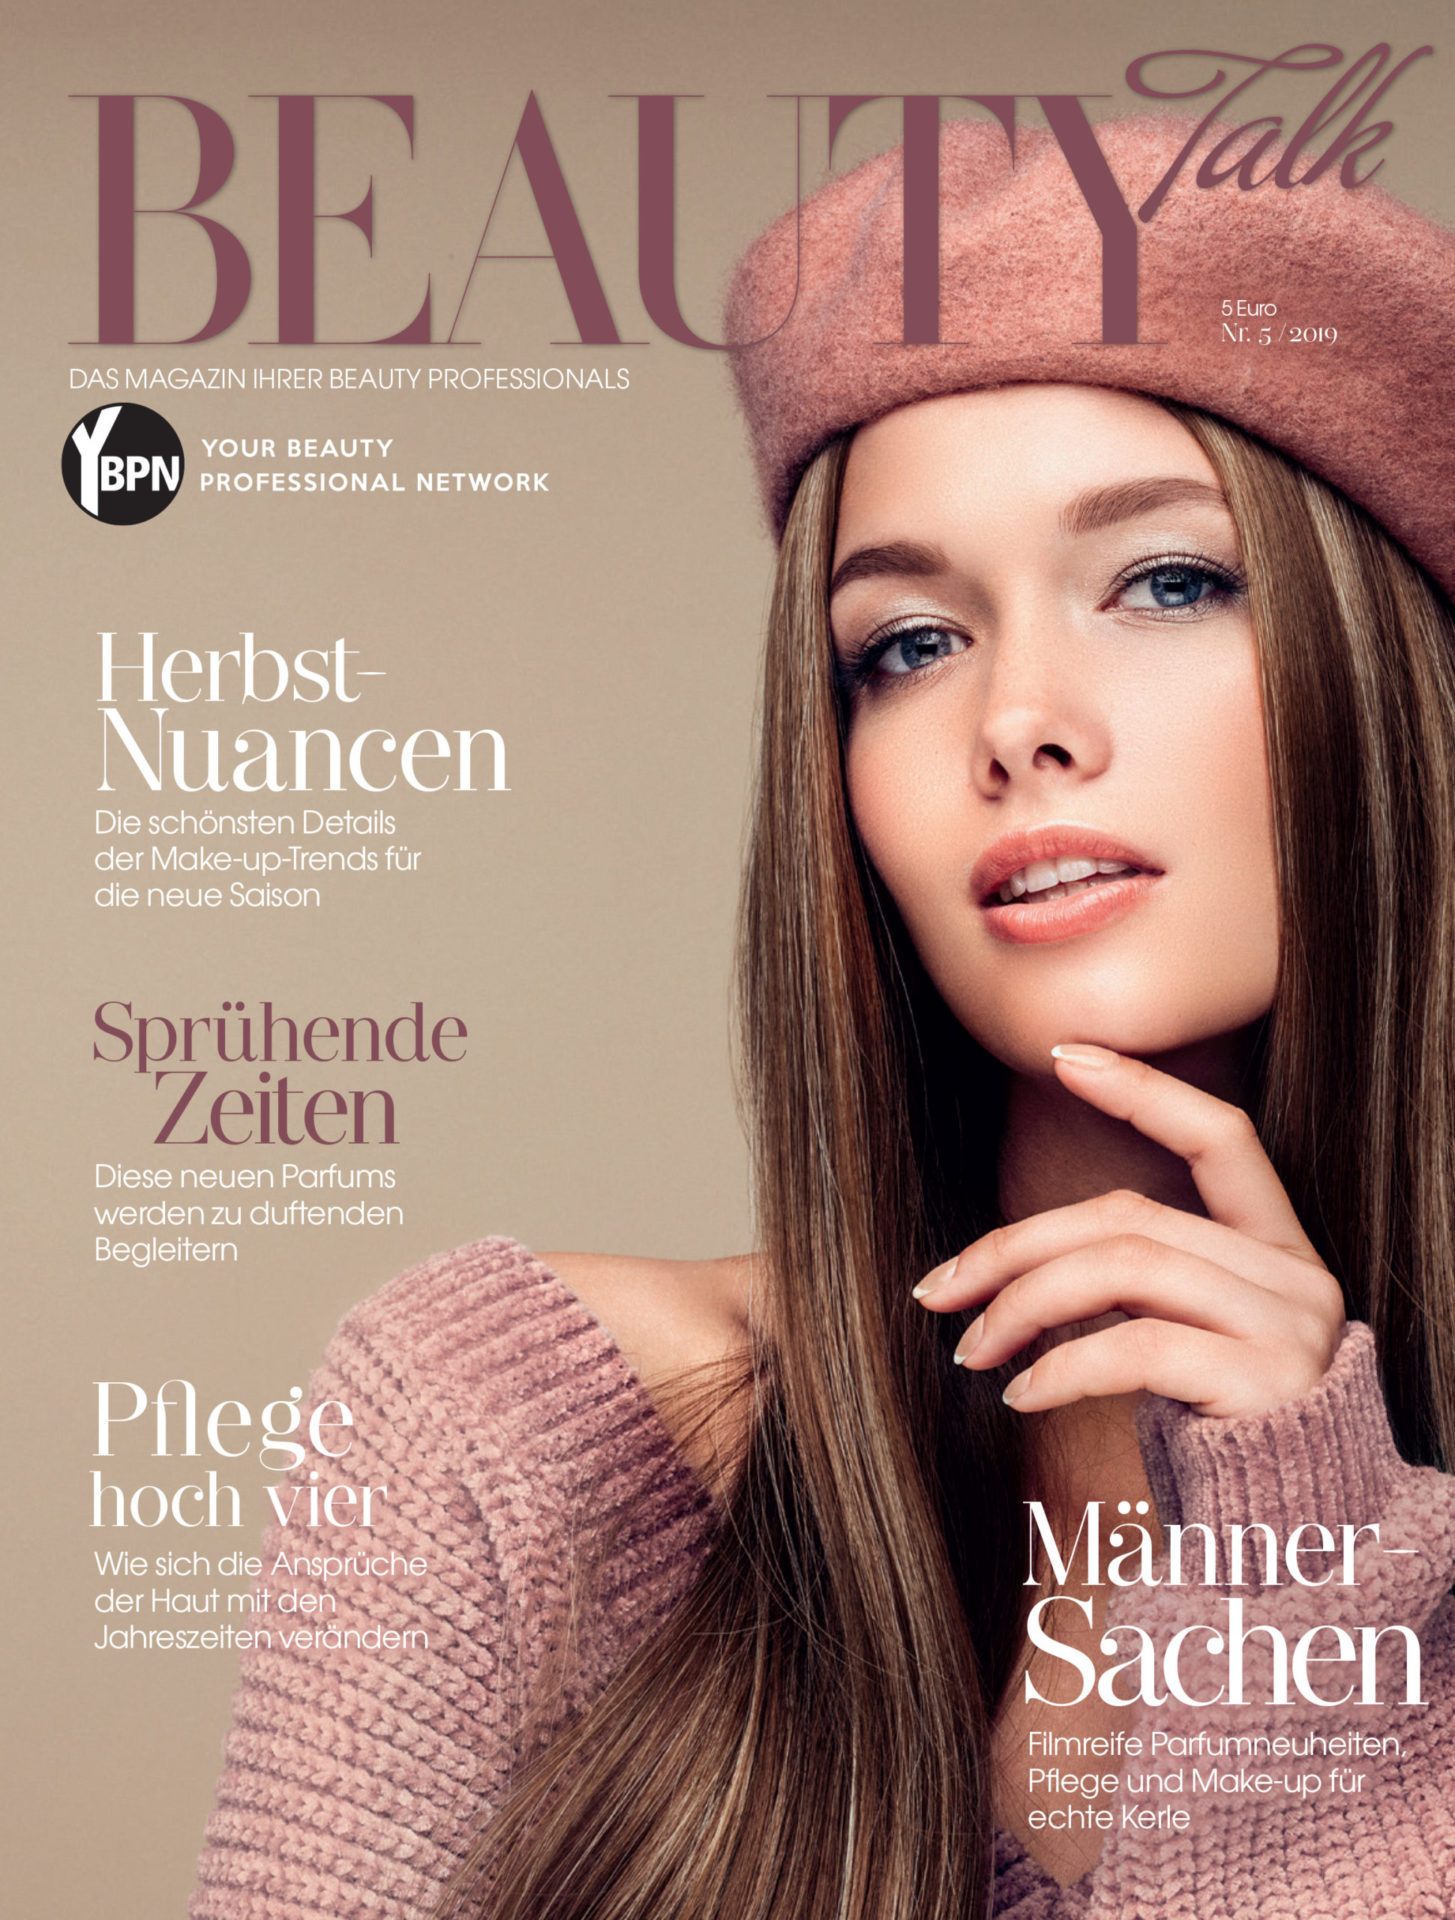 Beauty talk magazine 2019 oct cover scaled